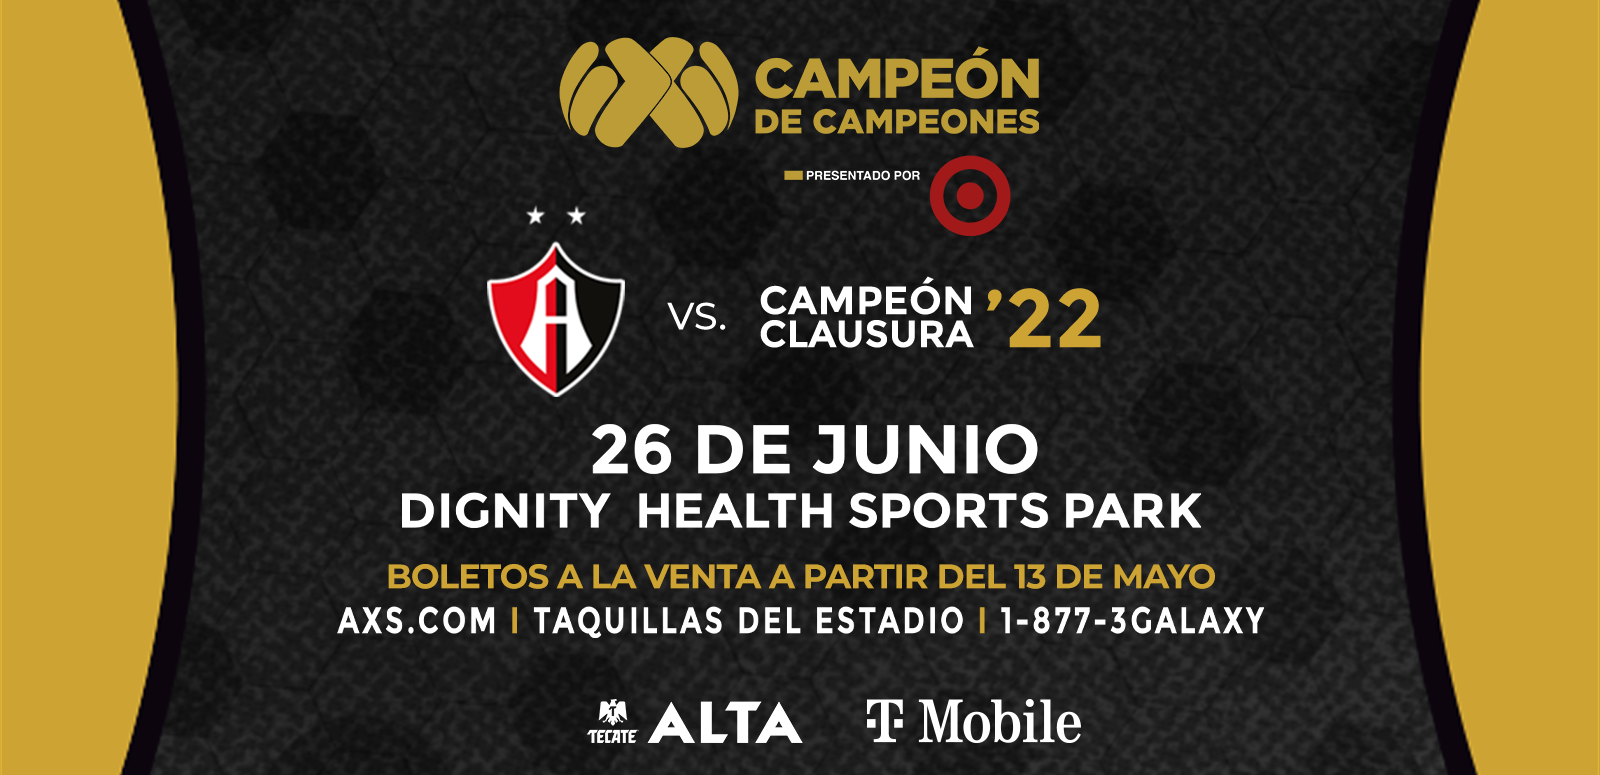 More Info for Dignity Health Sports Park to Host the 7th Edition of Campeón de Campeones Presentado por Target on Sunday, June 26